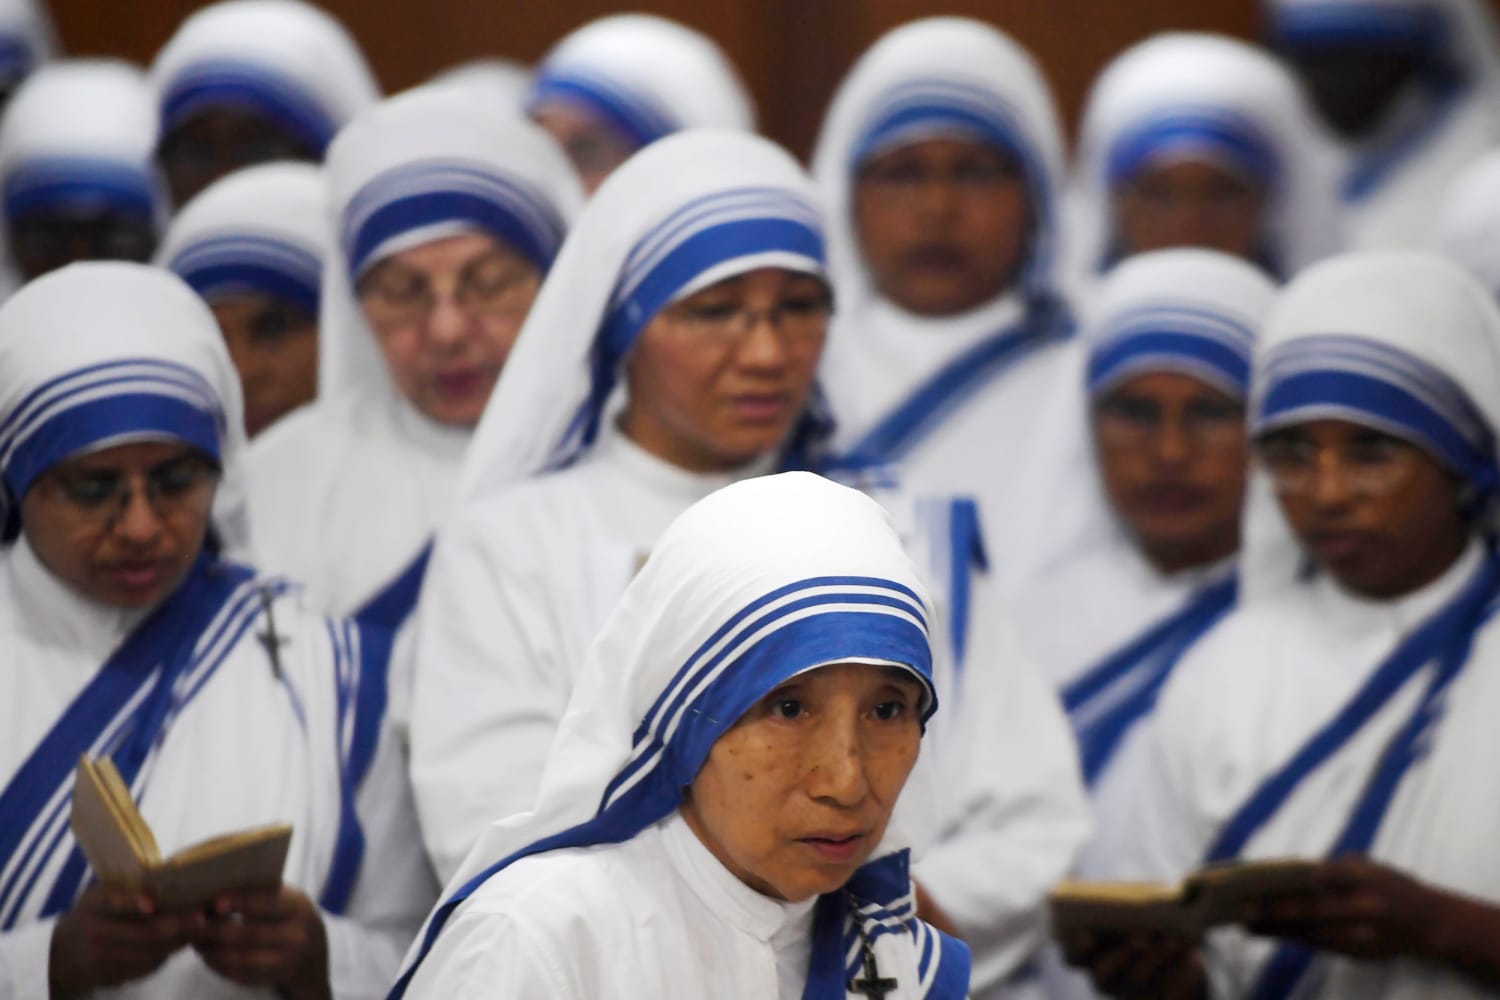 Mother Teresa’s charity banned from receiving foreign funds by India